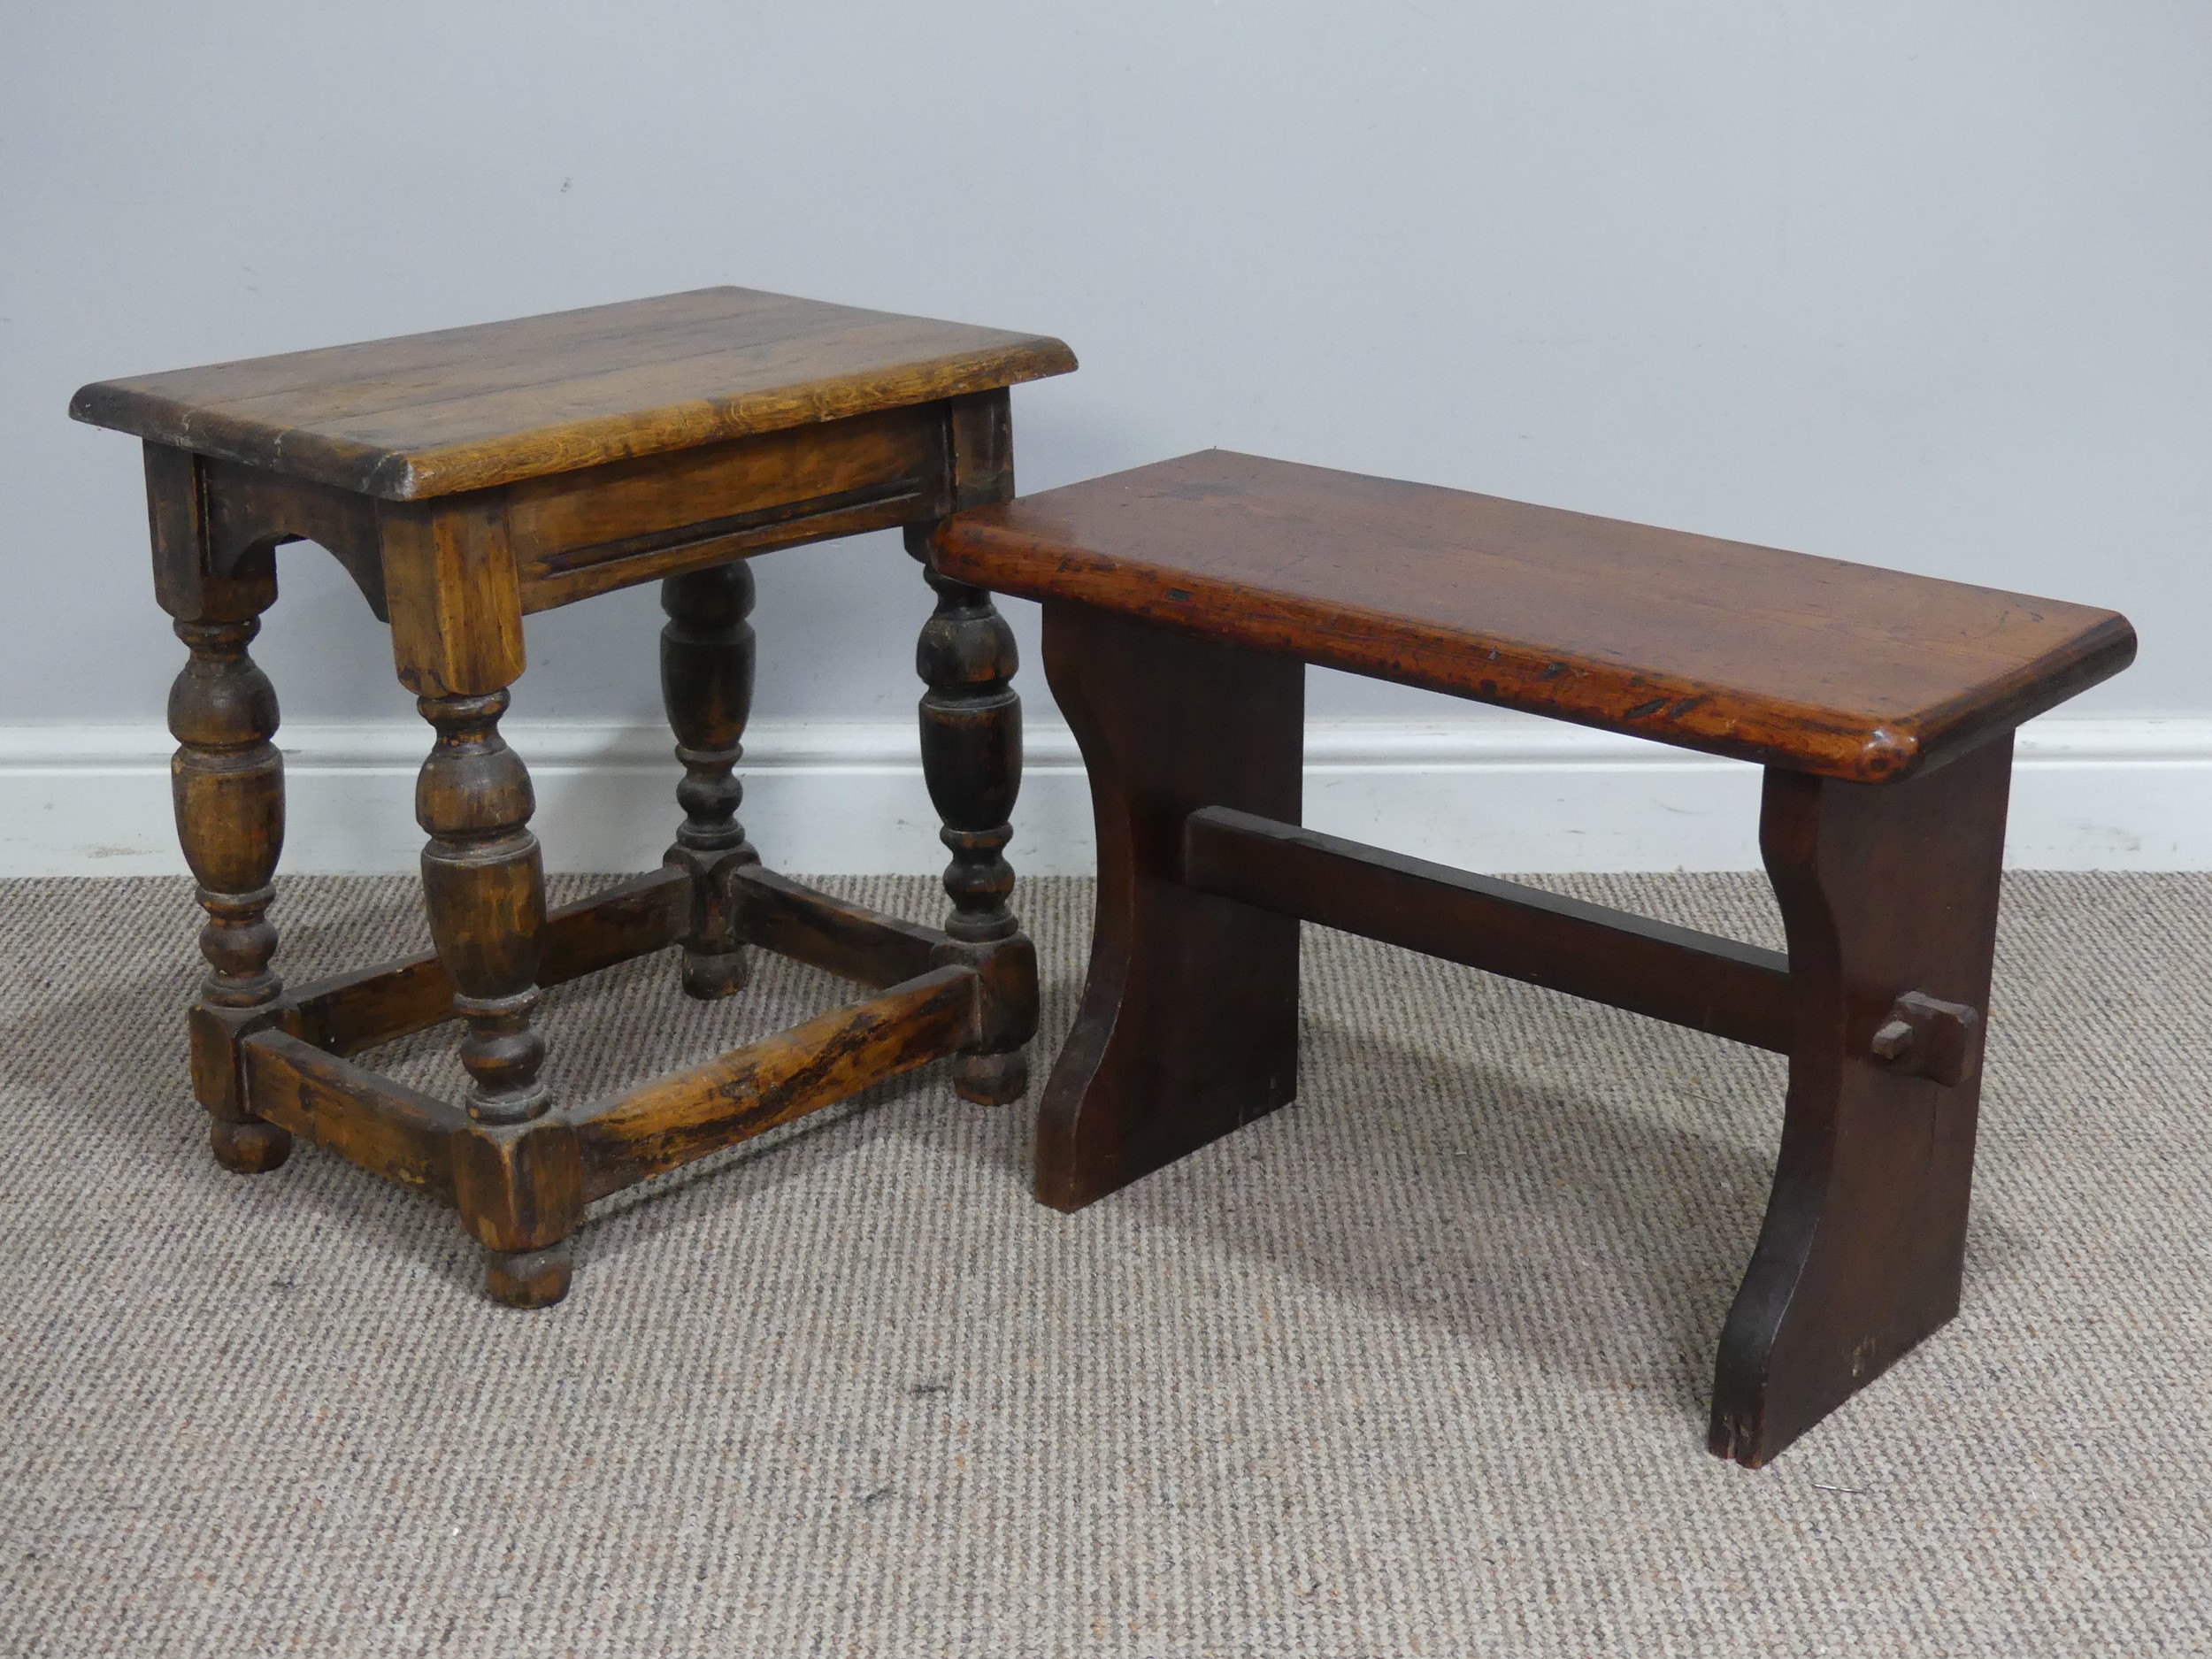 An 18th century style oak Joint Stool, W 45.5 cm x H 45.5 cm x D 30 cm, together with another